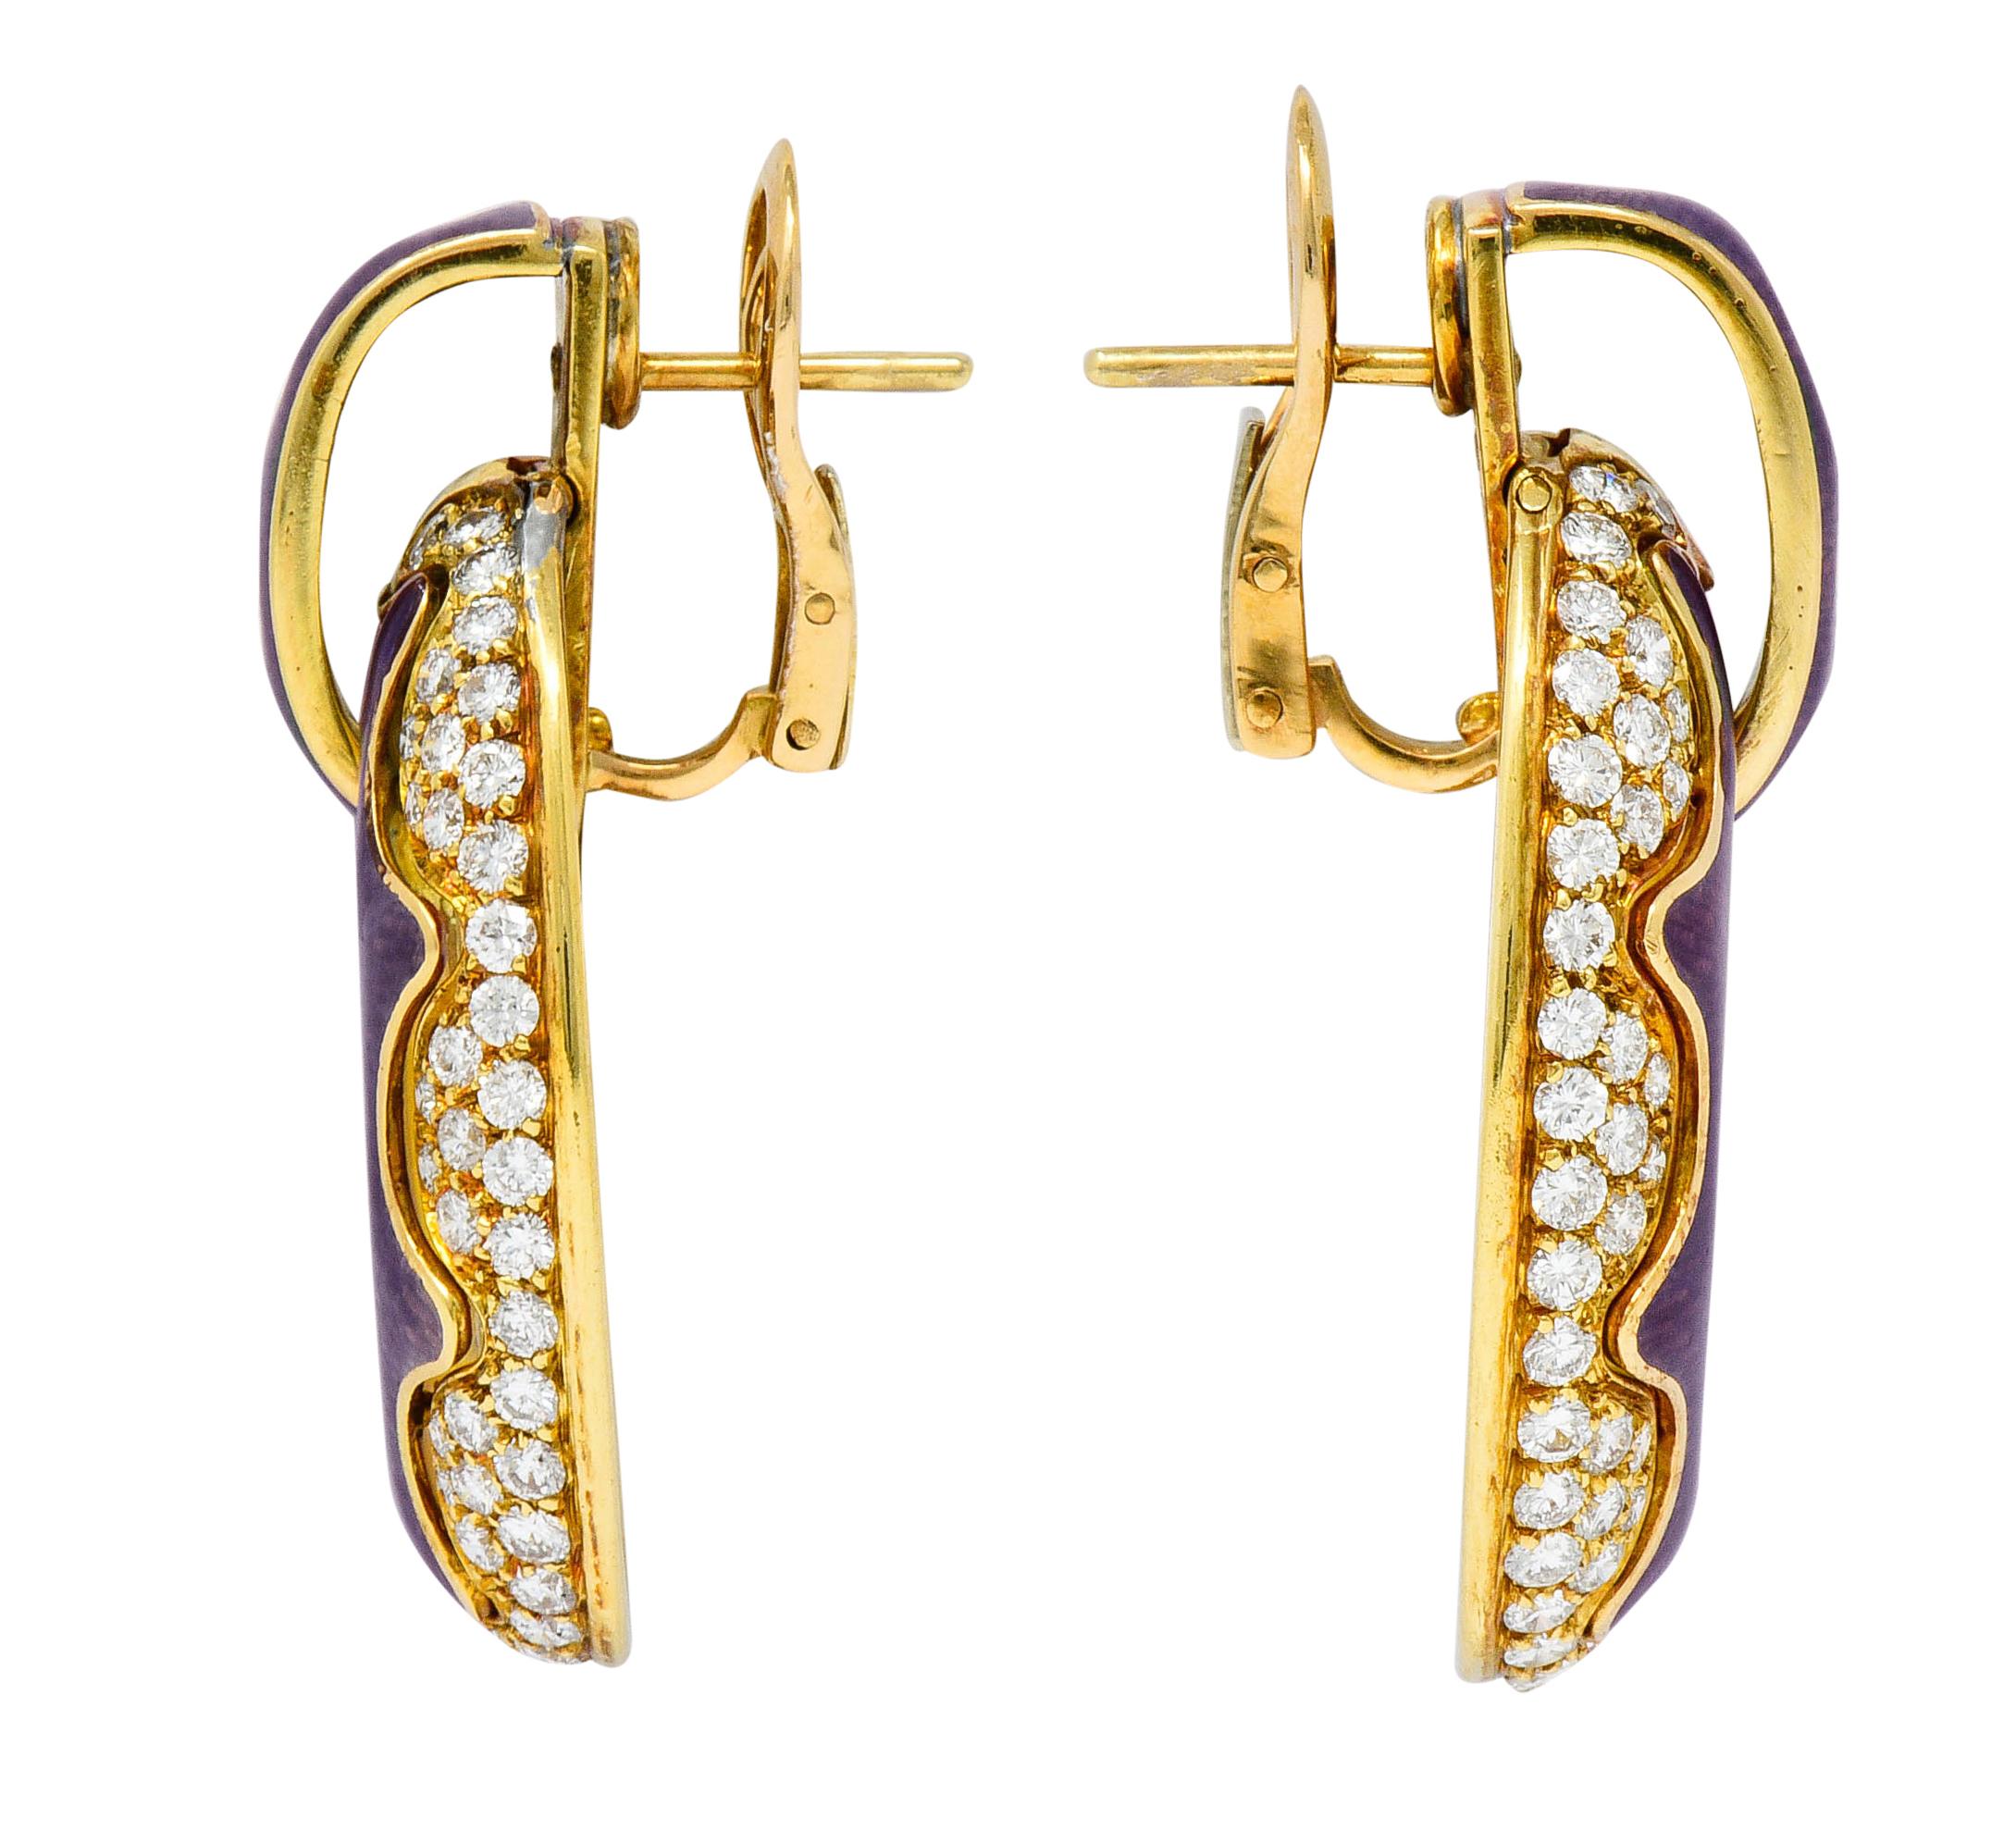 Doorknocker style earrings featuring a scalloped design glossed with lavender enamel

Exhibiting no loss and a subtle burst motif

Pavé set throughout by round brilliant cut diamonds weighing in total approximately 5.50 carats; G to H color with VS